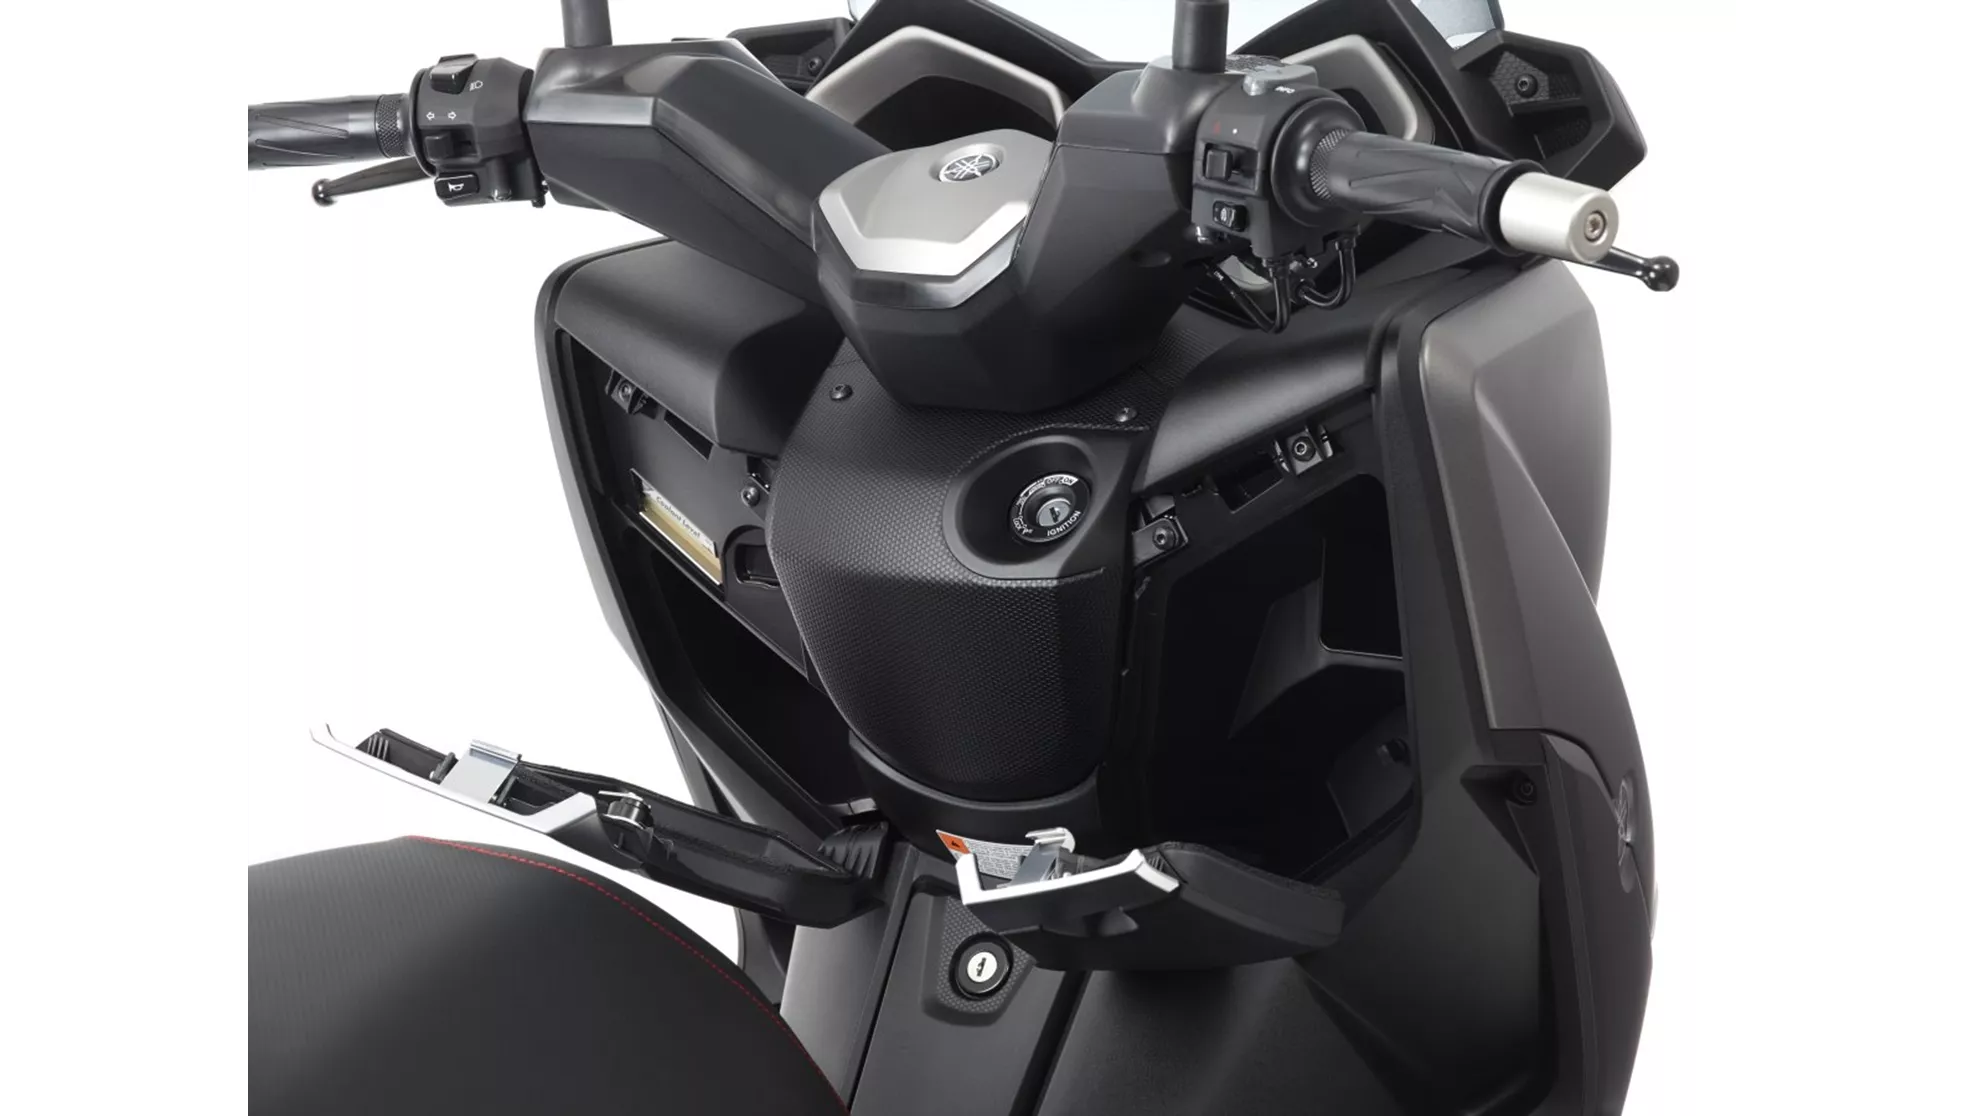 Picture Yamaha X-Max 250